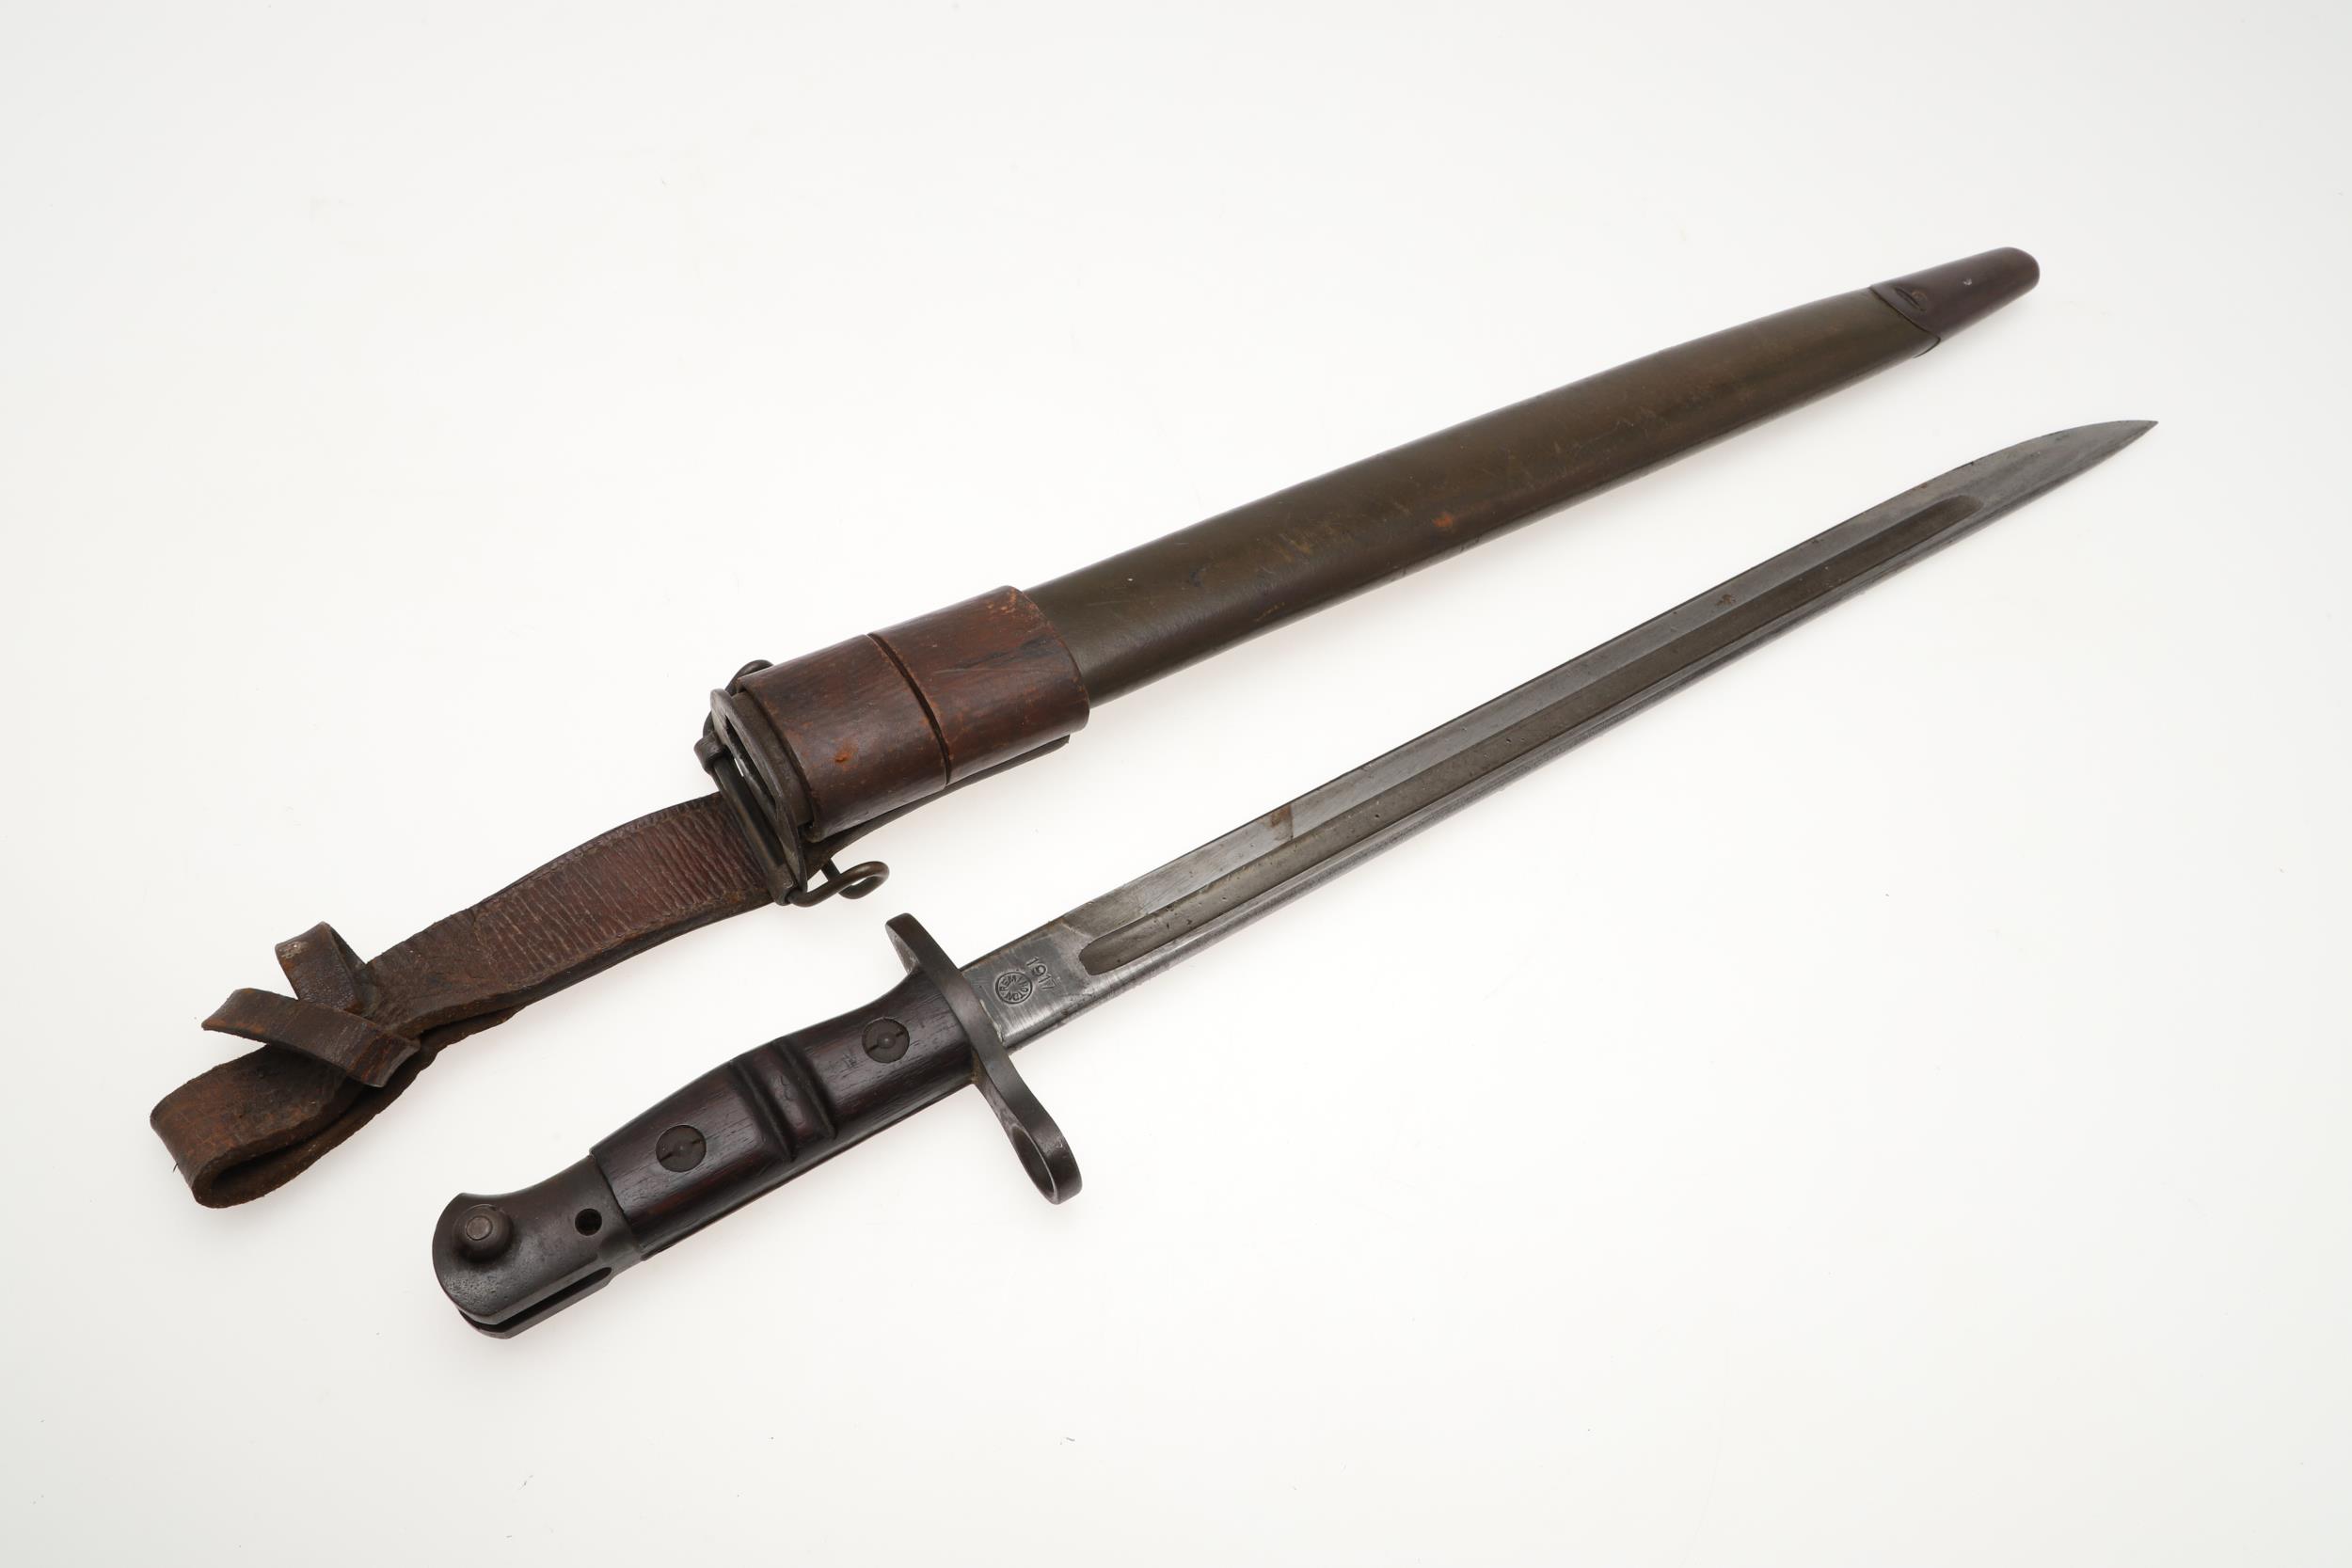 AN AMERICAN REMINGTON FIRST WORLD WAR 1917 PATTERN BAYONET AND SCABBARD. - Image 2 of 8